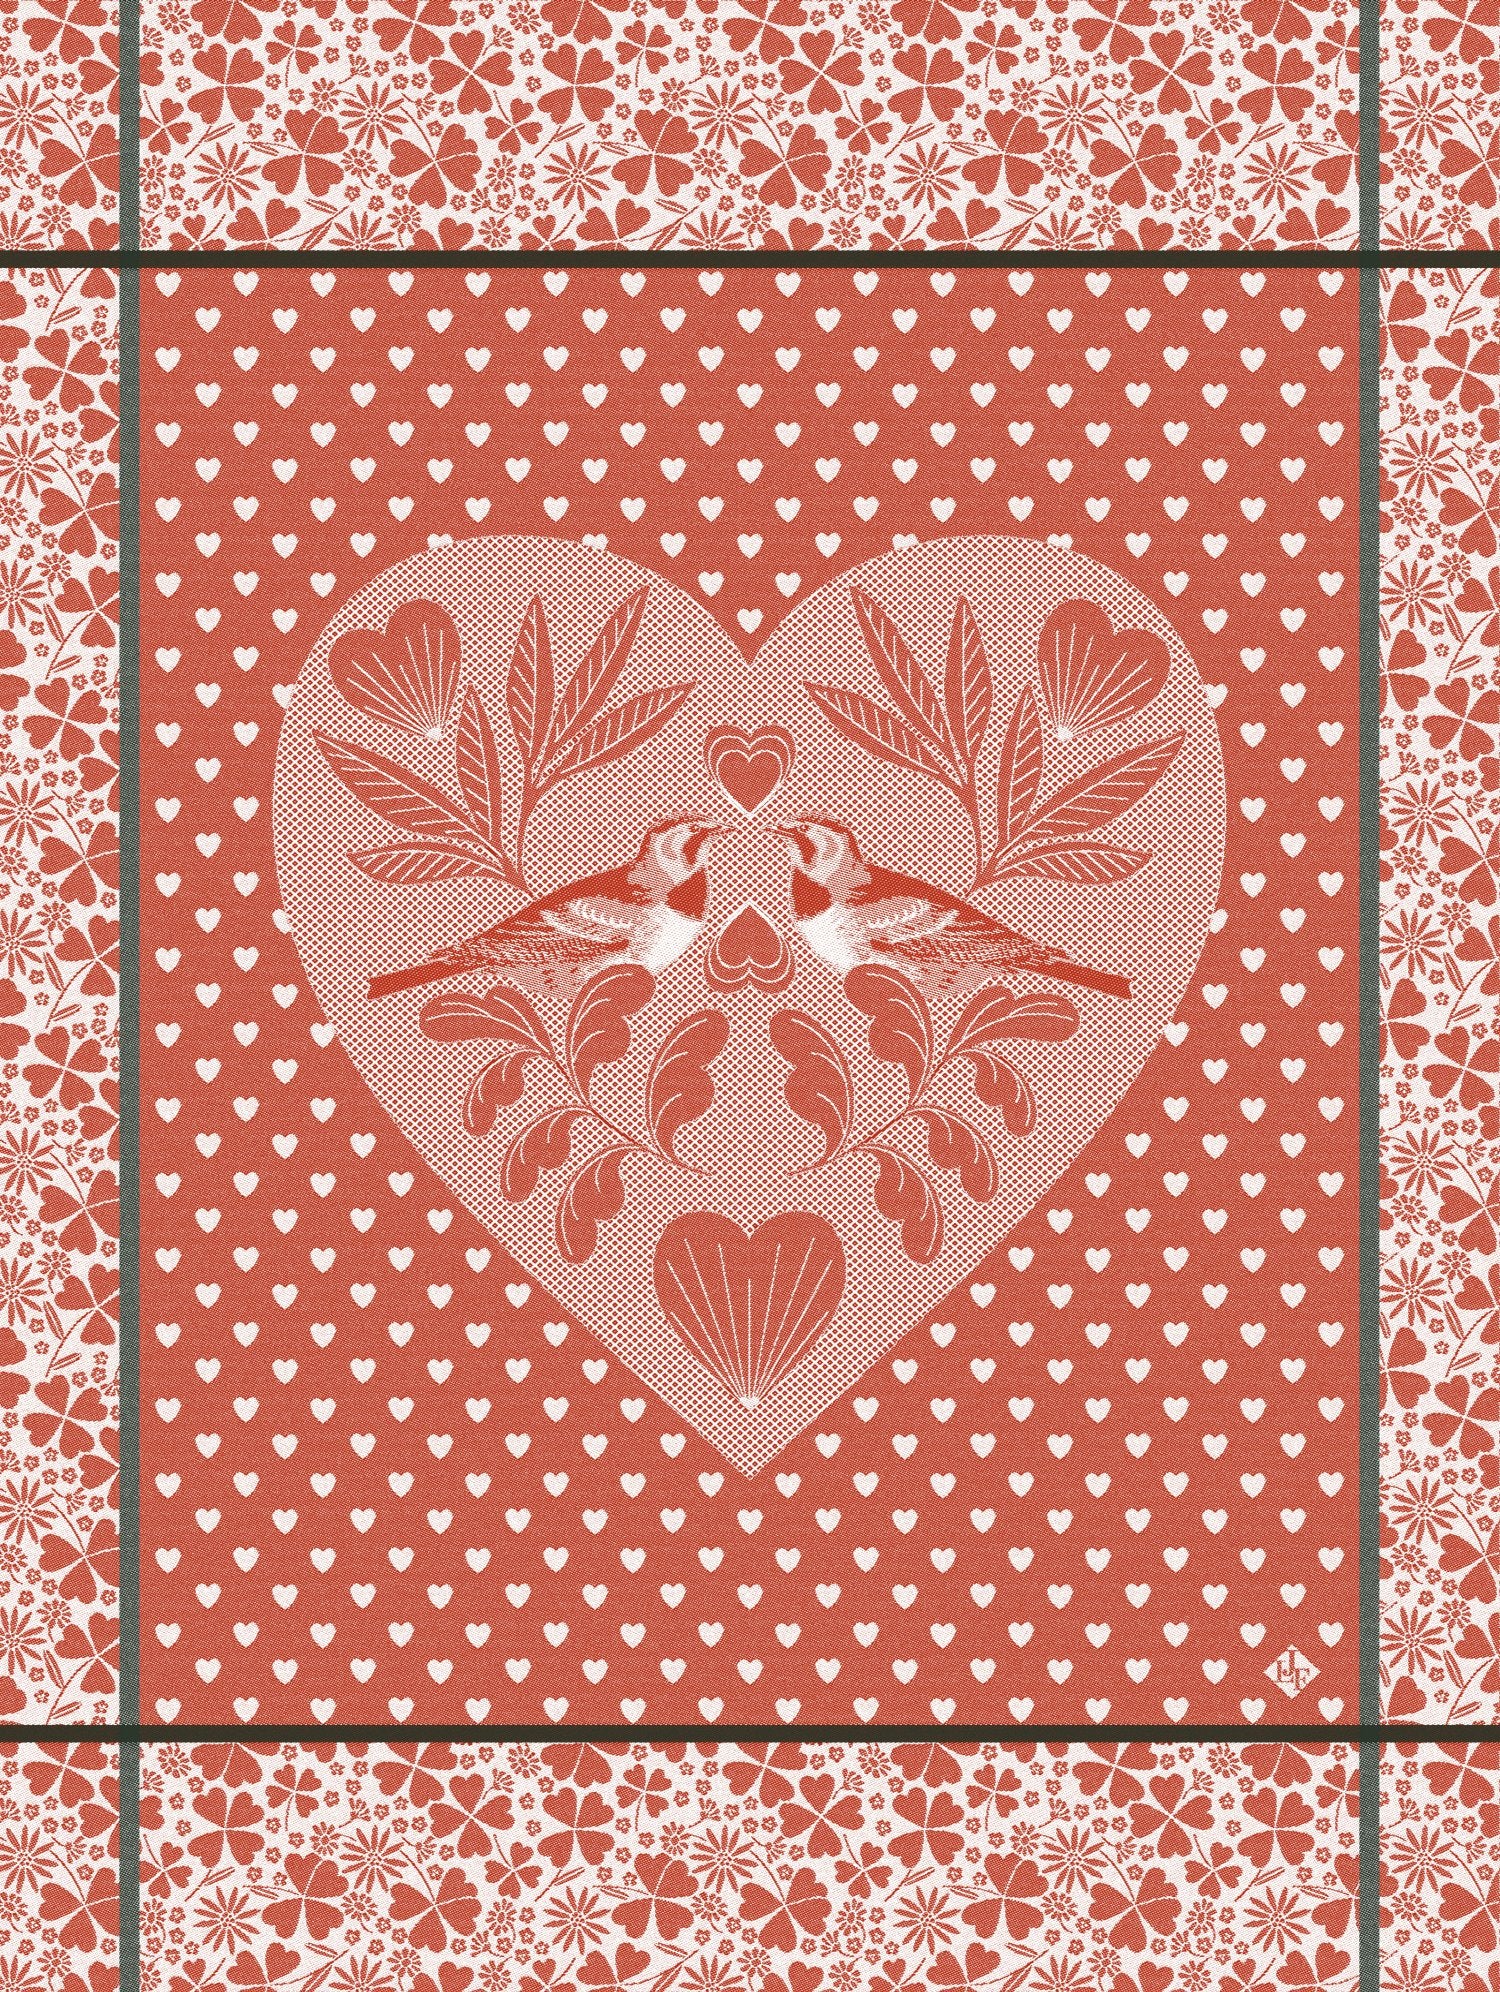 Jacquard Francais "Amour" (Poppy), Woven cotton tea towel. Made in France.